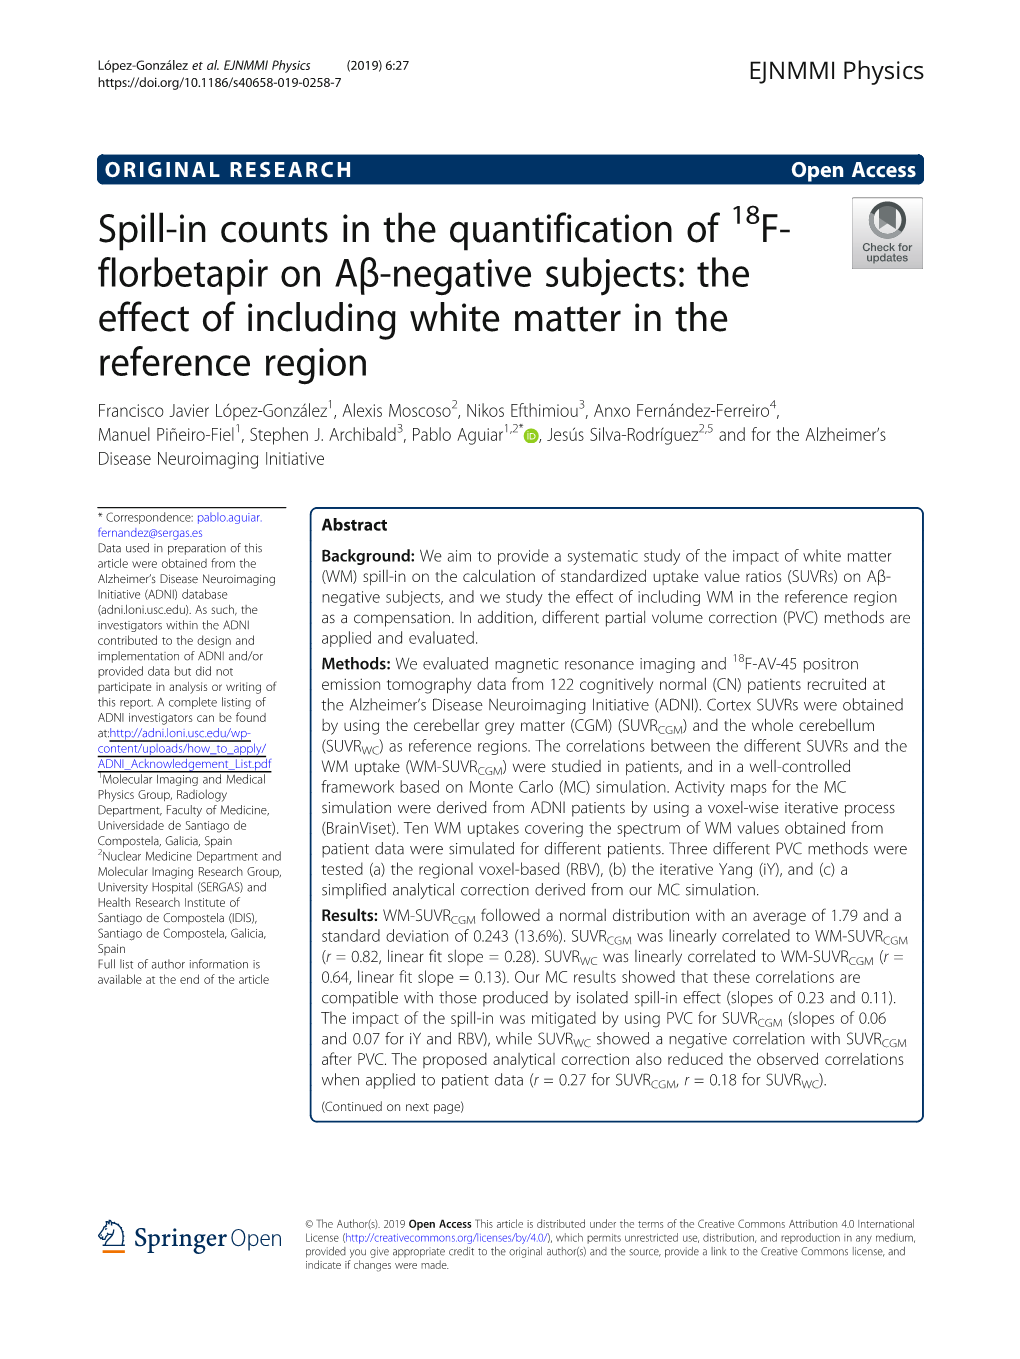 Spill-In Counts in the Quantification of 18F-Florbetapir on Aβ-Negative Subjects: the Effect of Including White Matter in the R